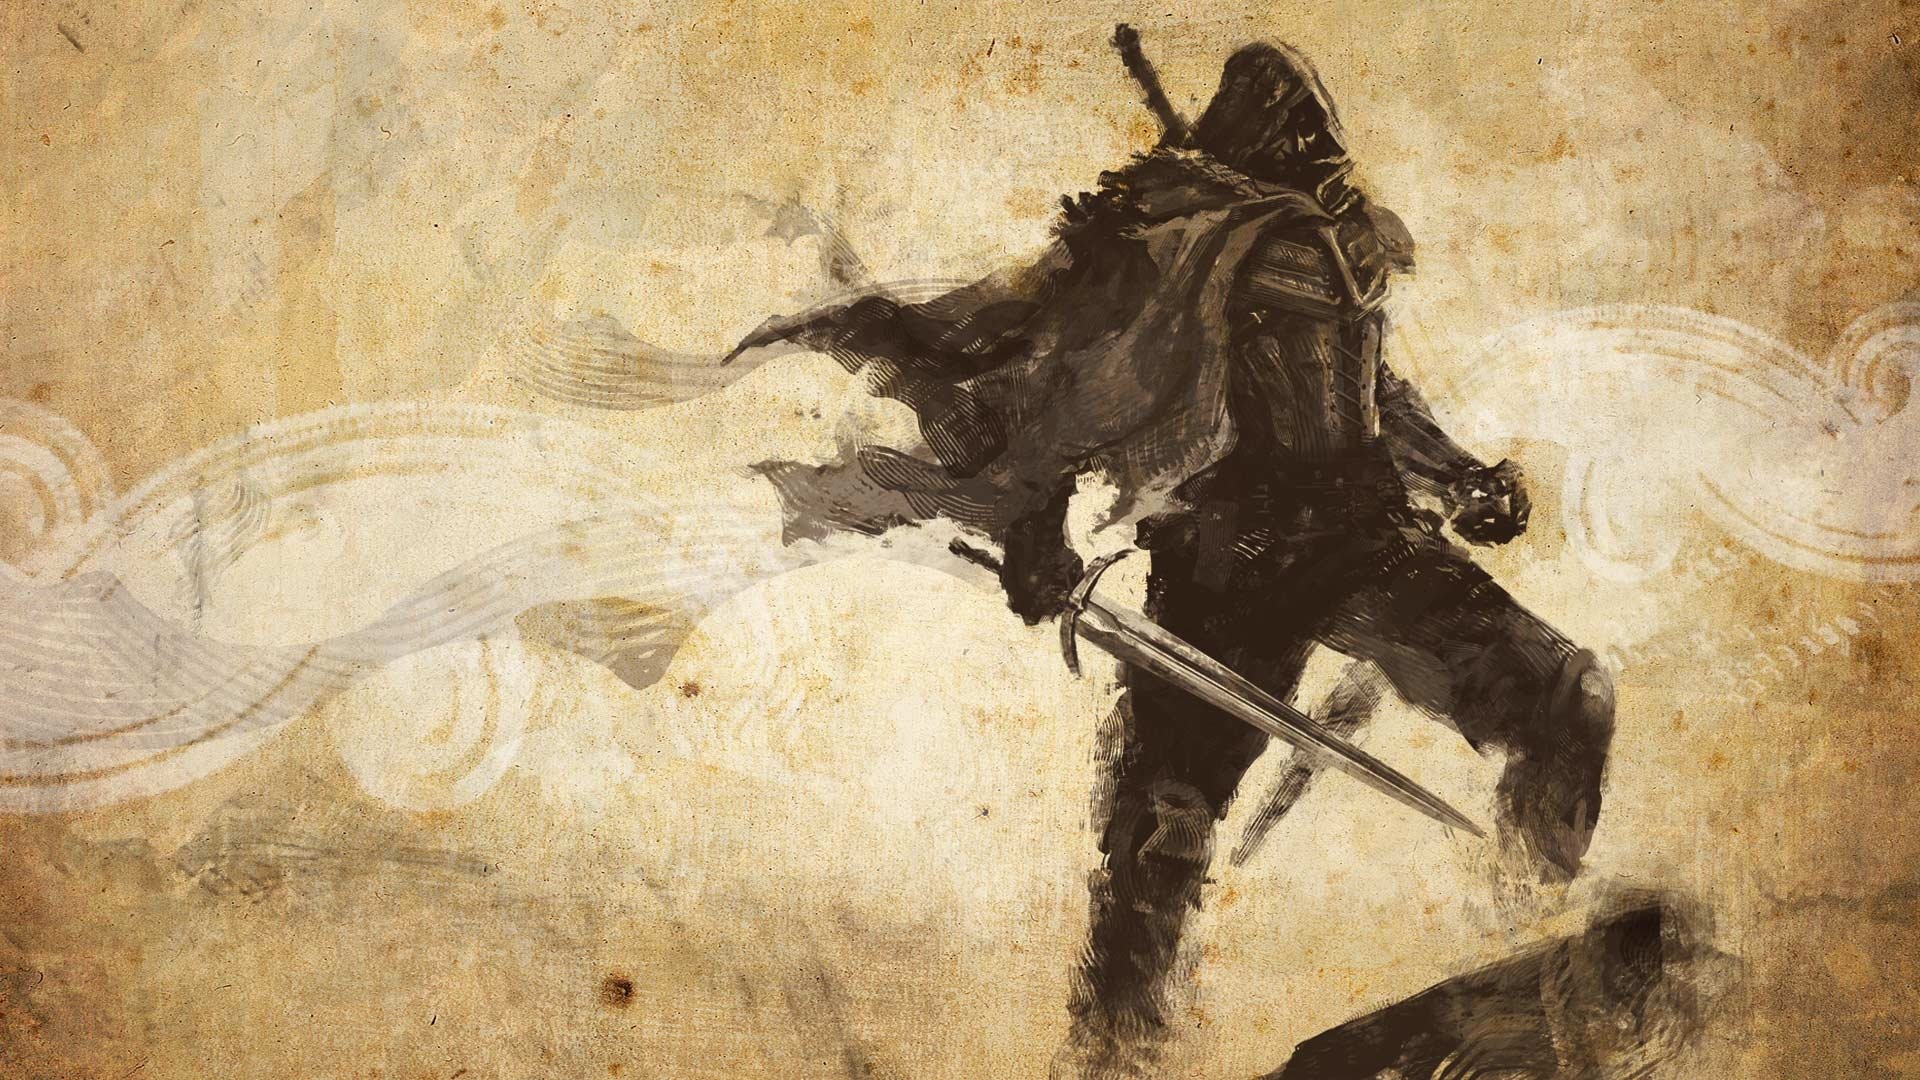 Joe Dever's Lone Wolf HD Remastered HD Wallpaper and Background Image